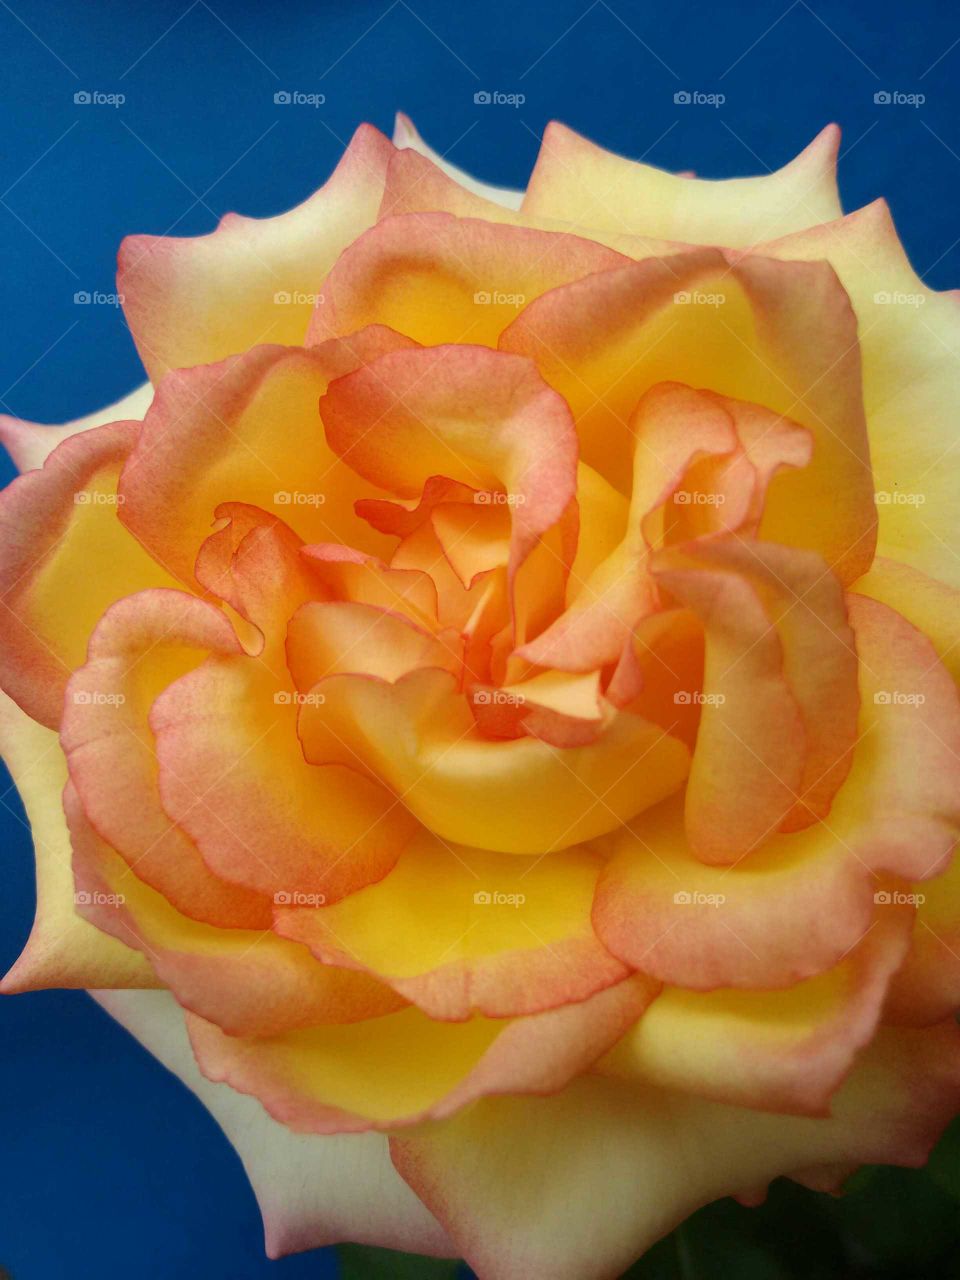 Foccus on rose, the petals are yellow, turning reddish at the tips. Ornamental flower of a garden in Brazil.